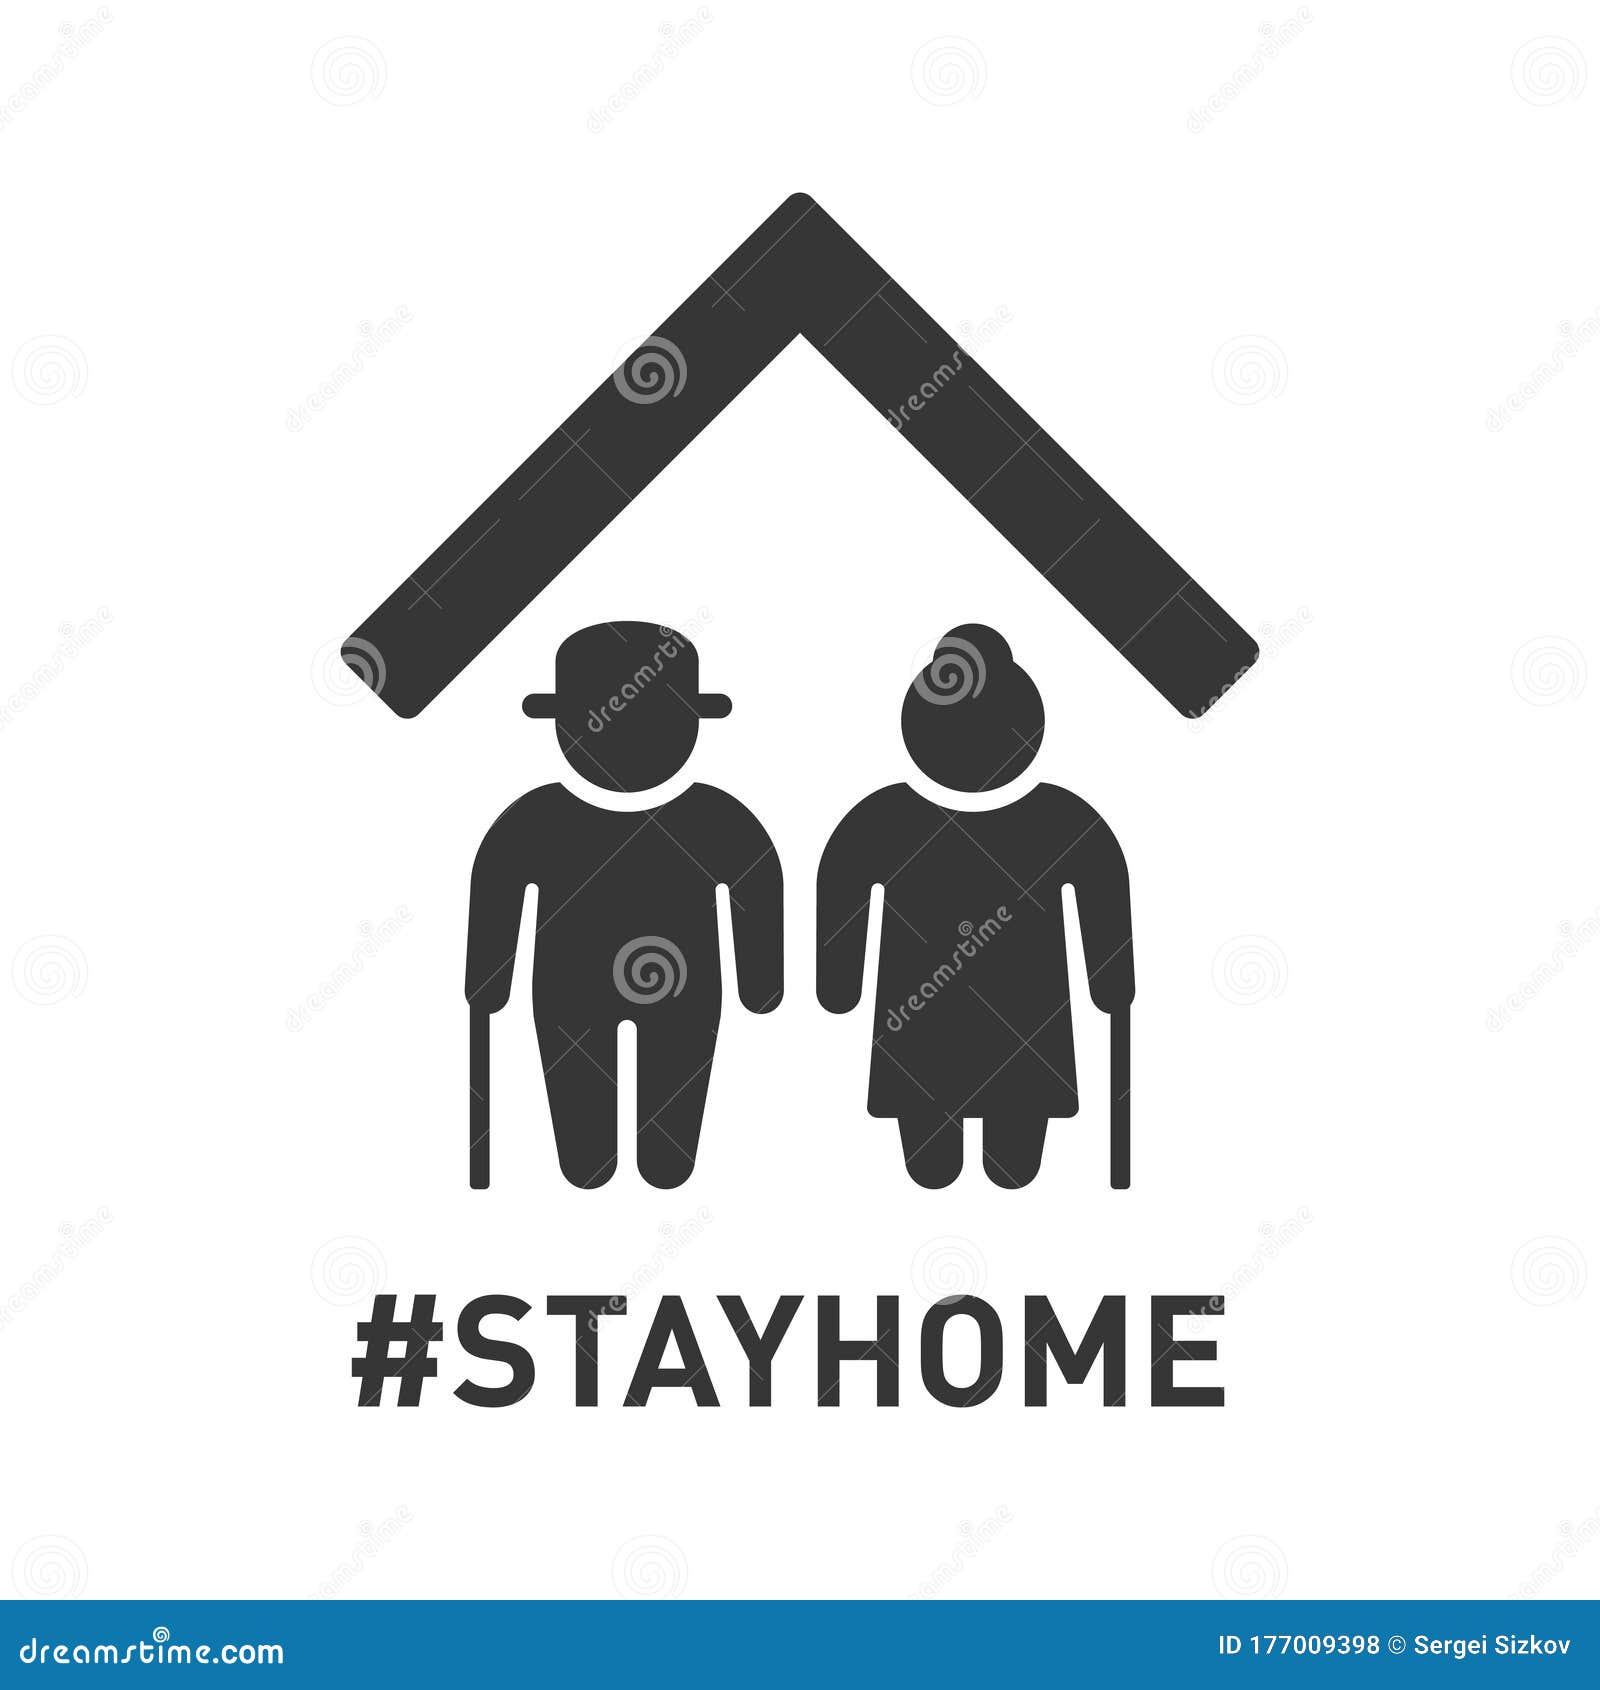 stayhome hashtag sign with two older peoples. coronavirus protection icon. 